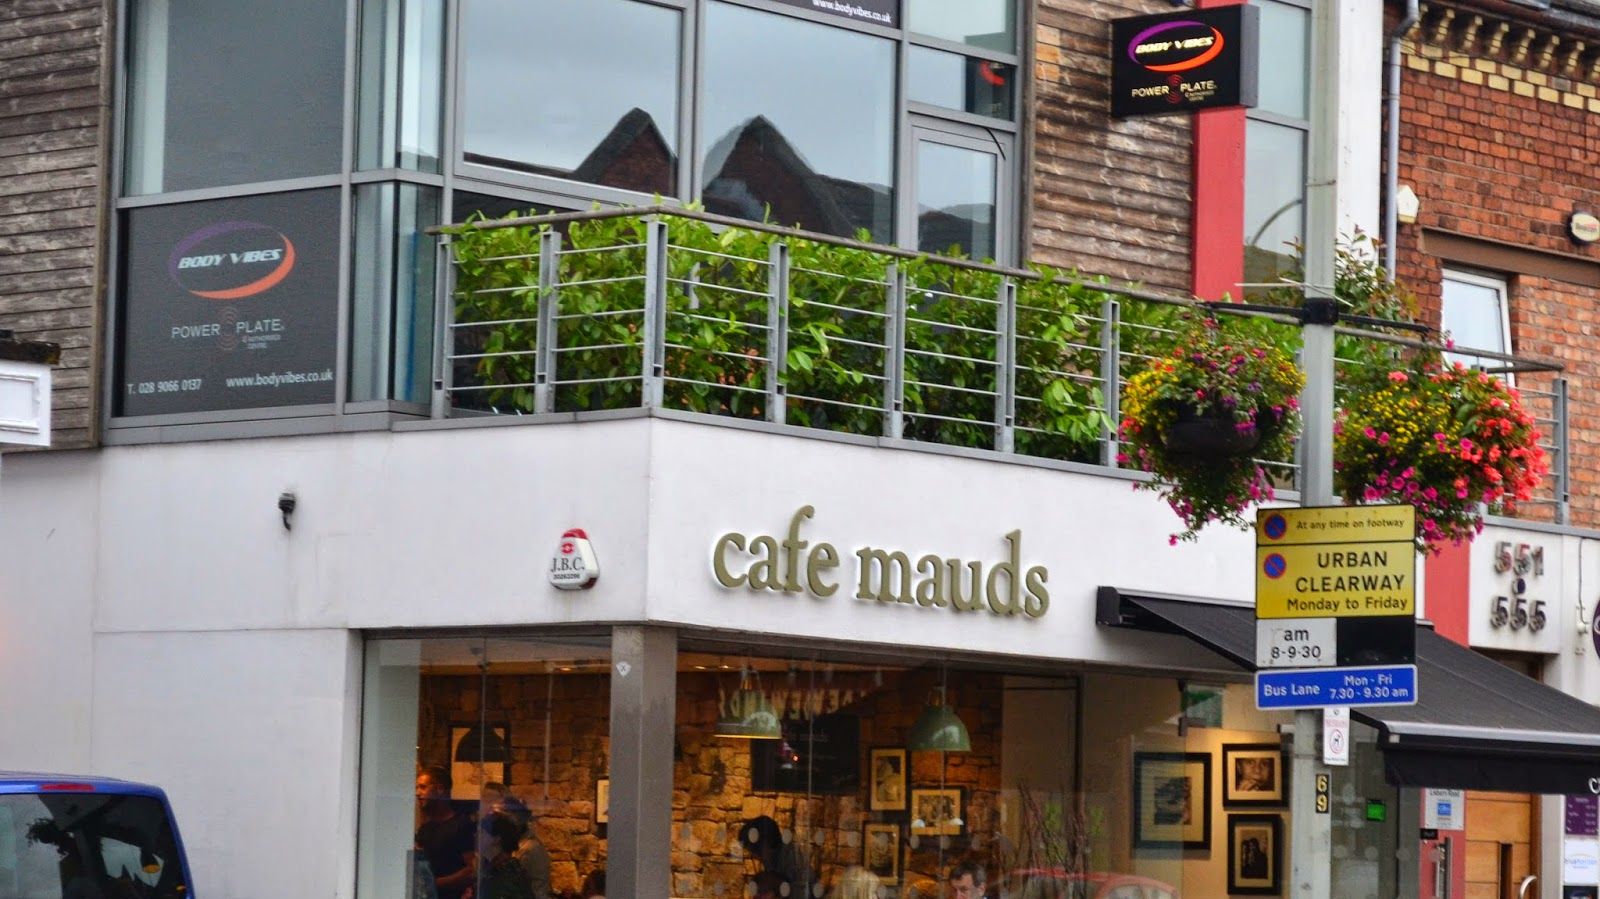 Cafe mauds www.cordiaapartments.com